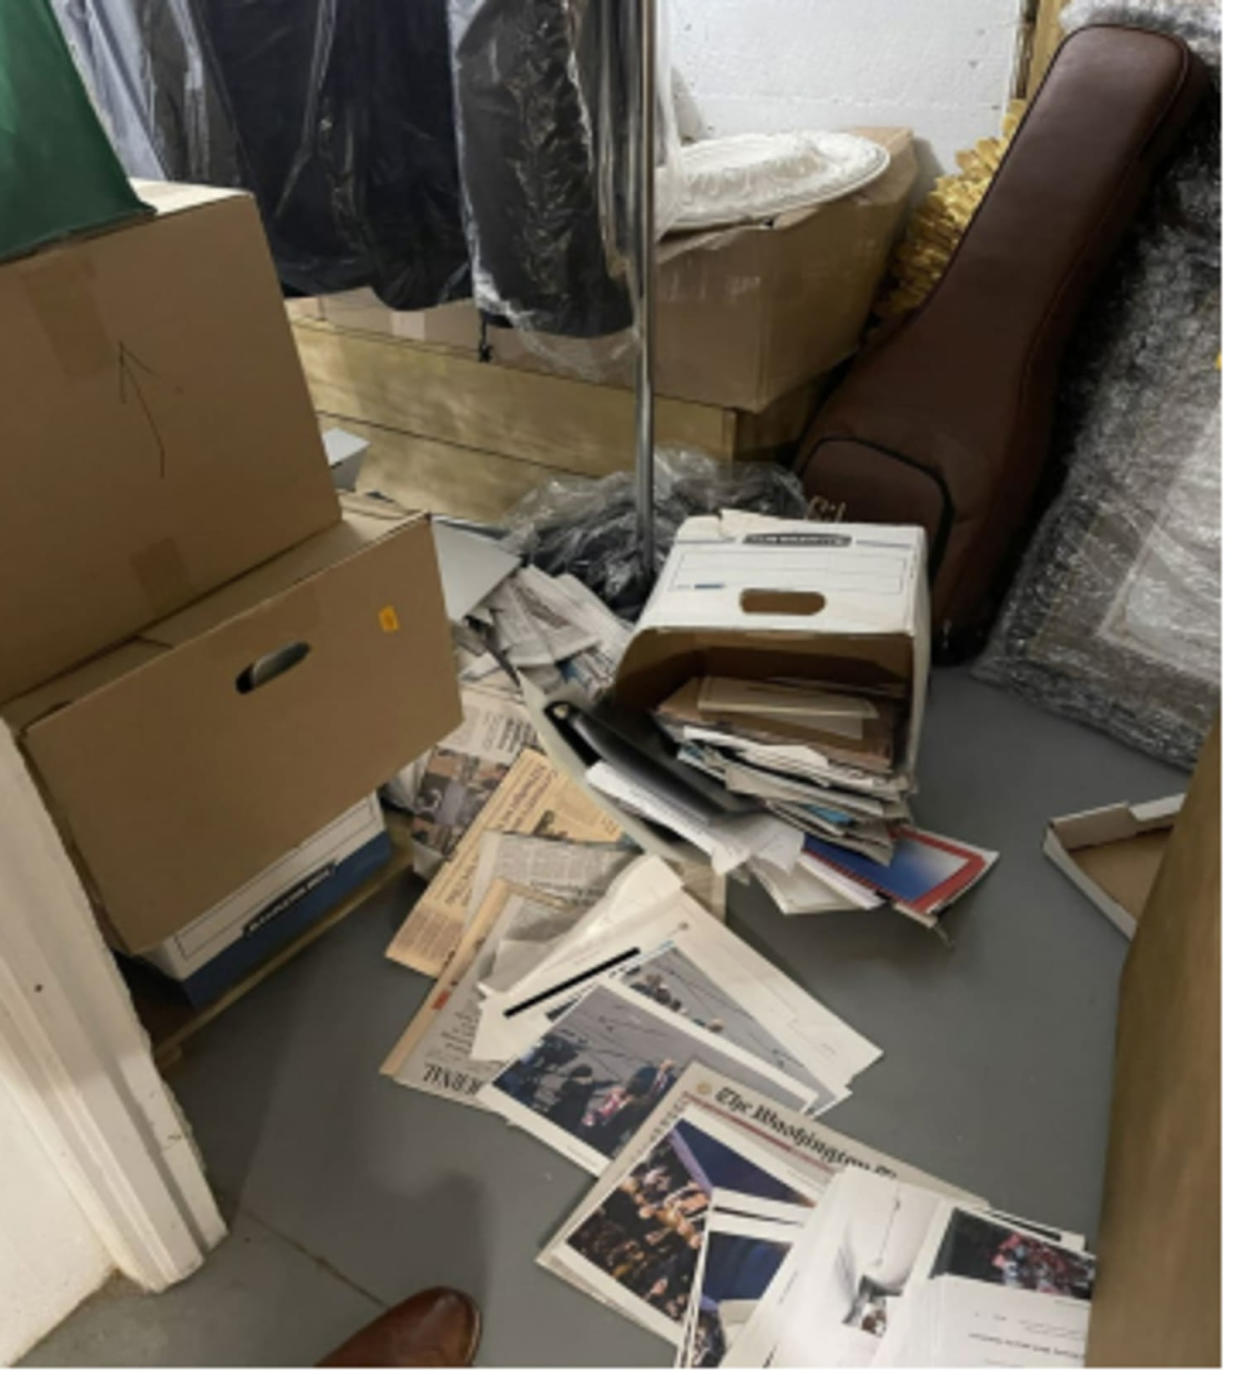 This image, contained in the indictment against former President Donald Trump, shows boxes of records on Dec. 7, 2021, in a storage room at Trump's Mar-a-Lago estate in Palm Beach, Fla., that had fallen over with contents spilling onto the floor. Trump is facing 37 felony charges related to the mishandling of classified documents according to an indictment unsealed Friday, June 9, 2023. (Justice Department via AP file)